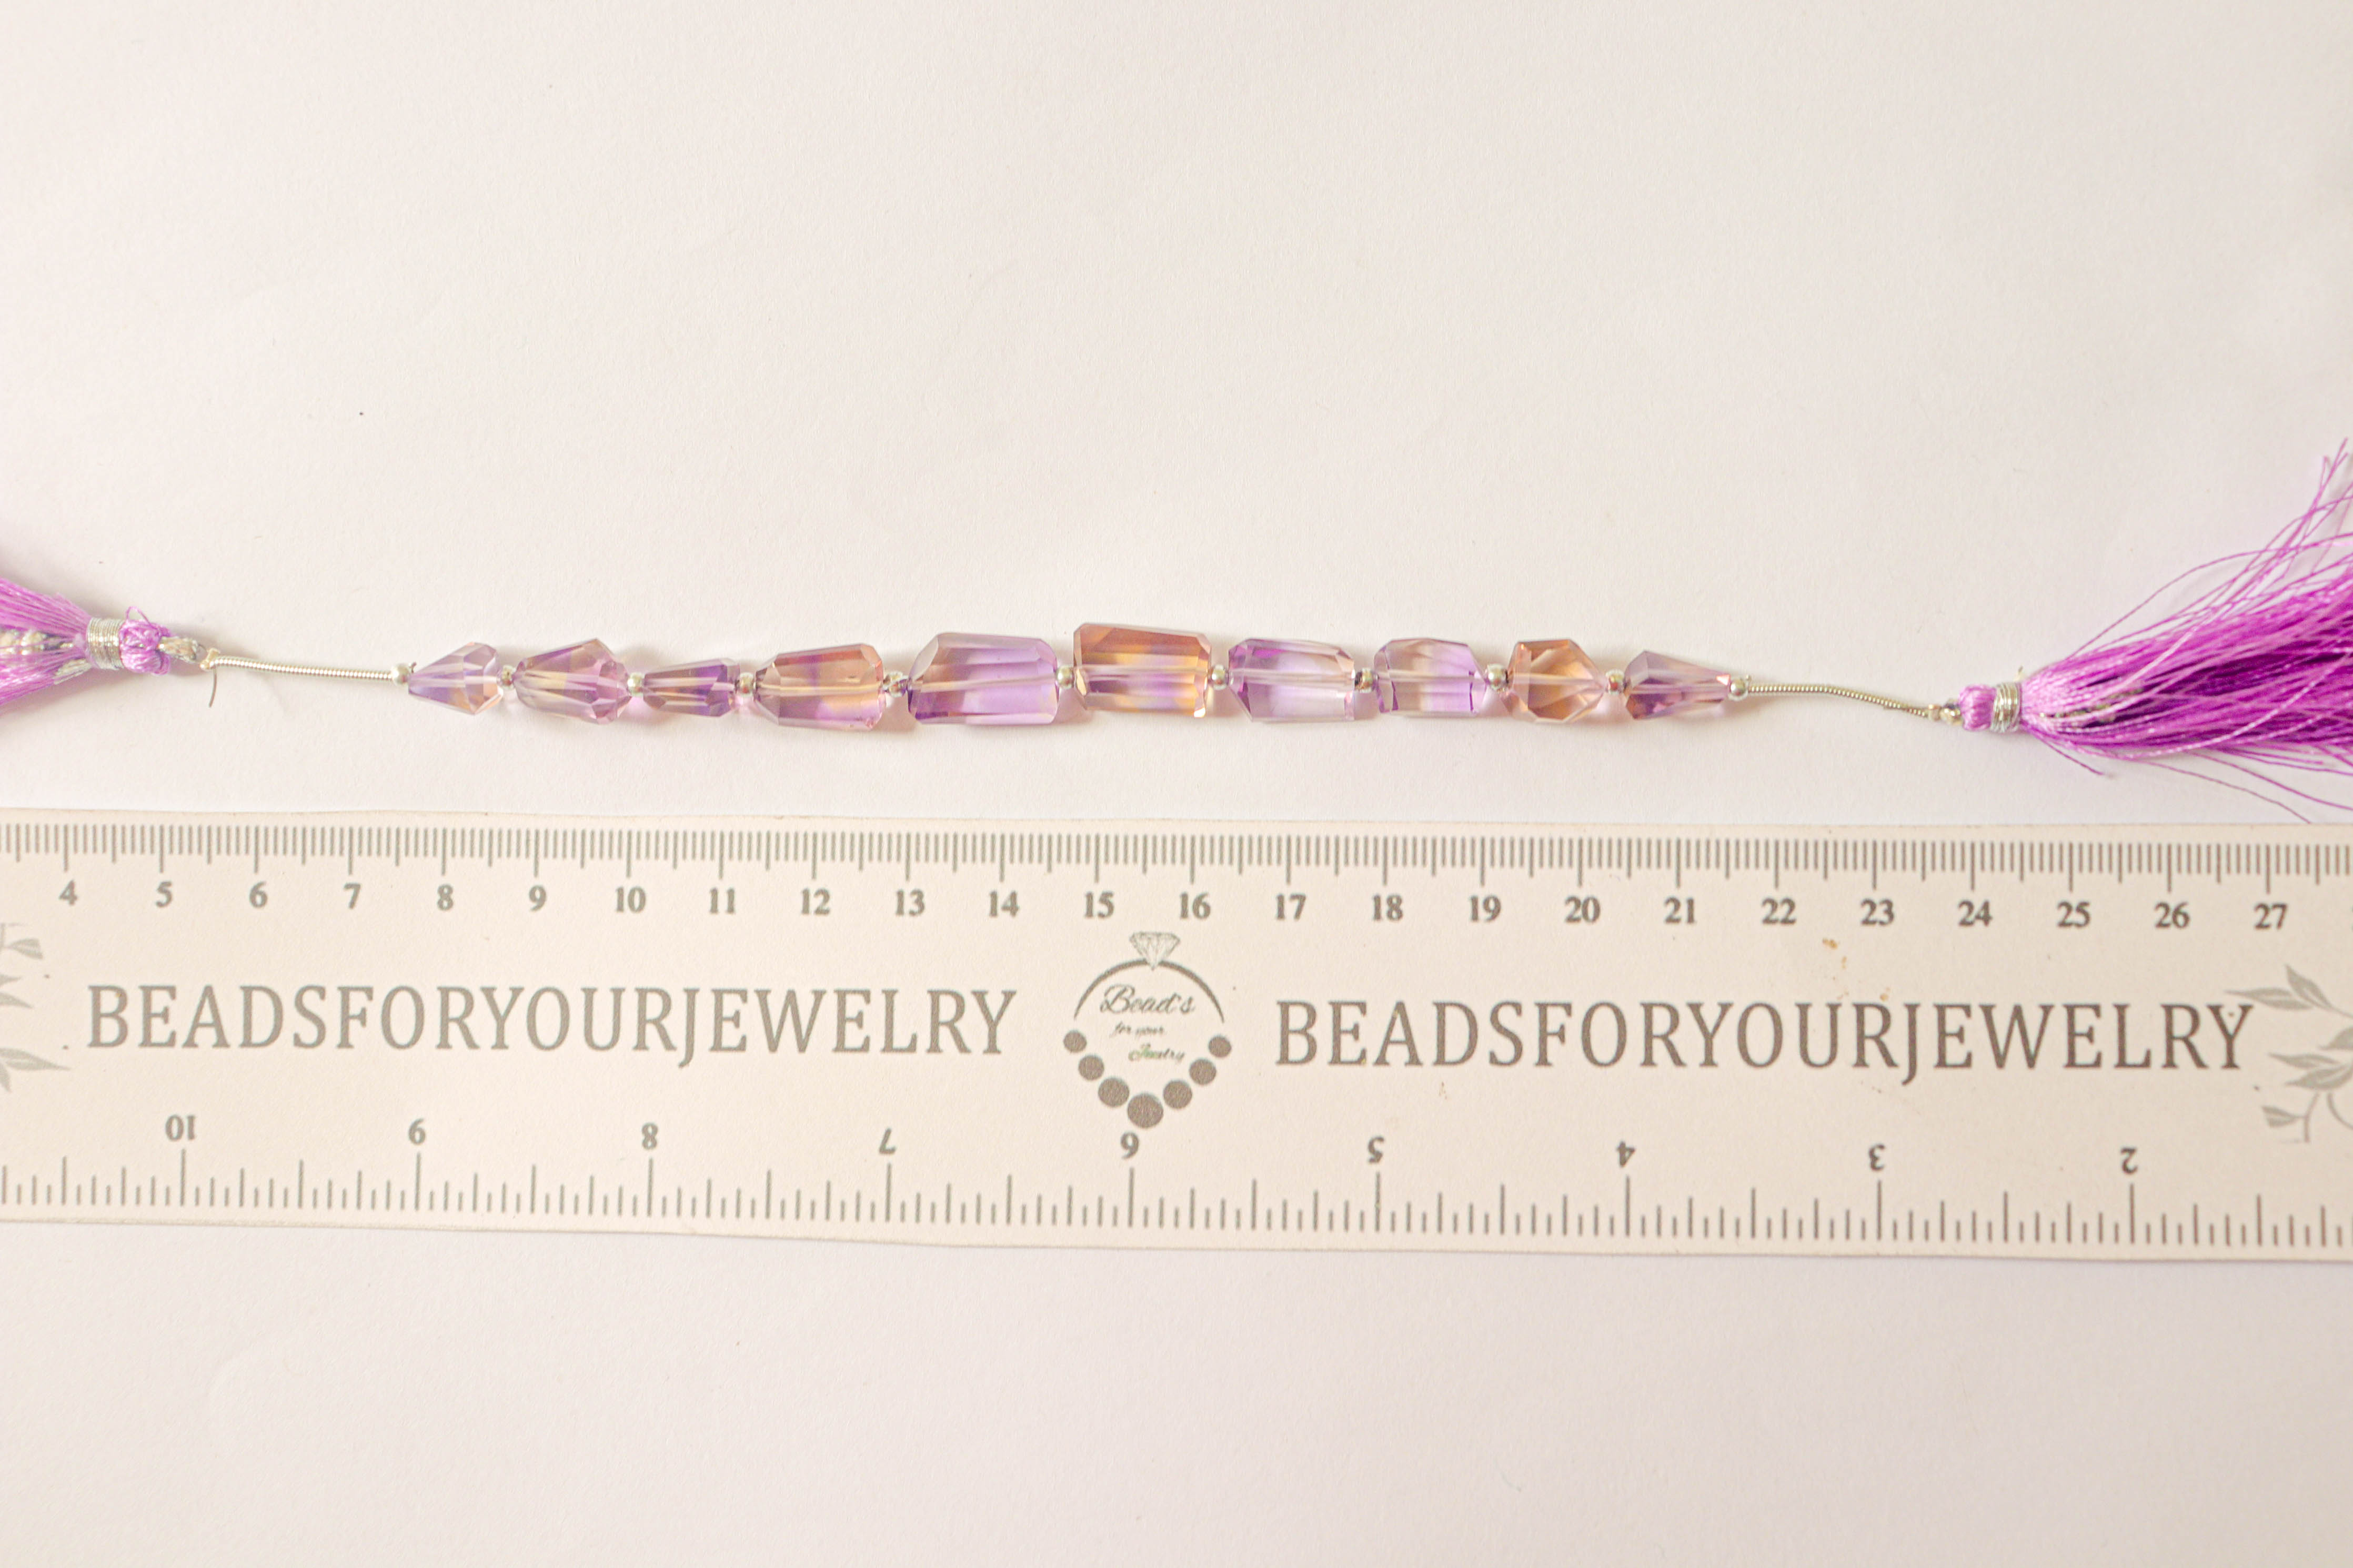 Ametrine Beads Uneven Shape Faceted Tumbles | 8x10mm-8x15mm | 10 Pieces | 5 inch | High Quality Ametrine Gemstone | Beadsforyourjewellery Beadsforyourjewelry